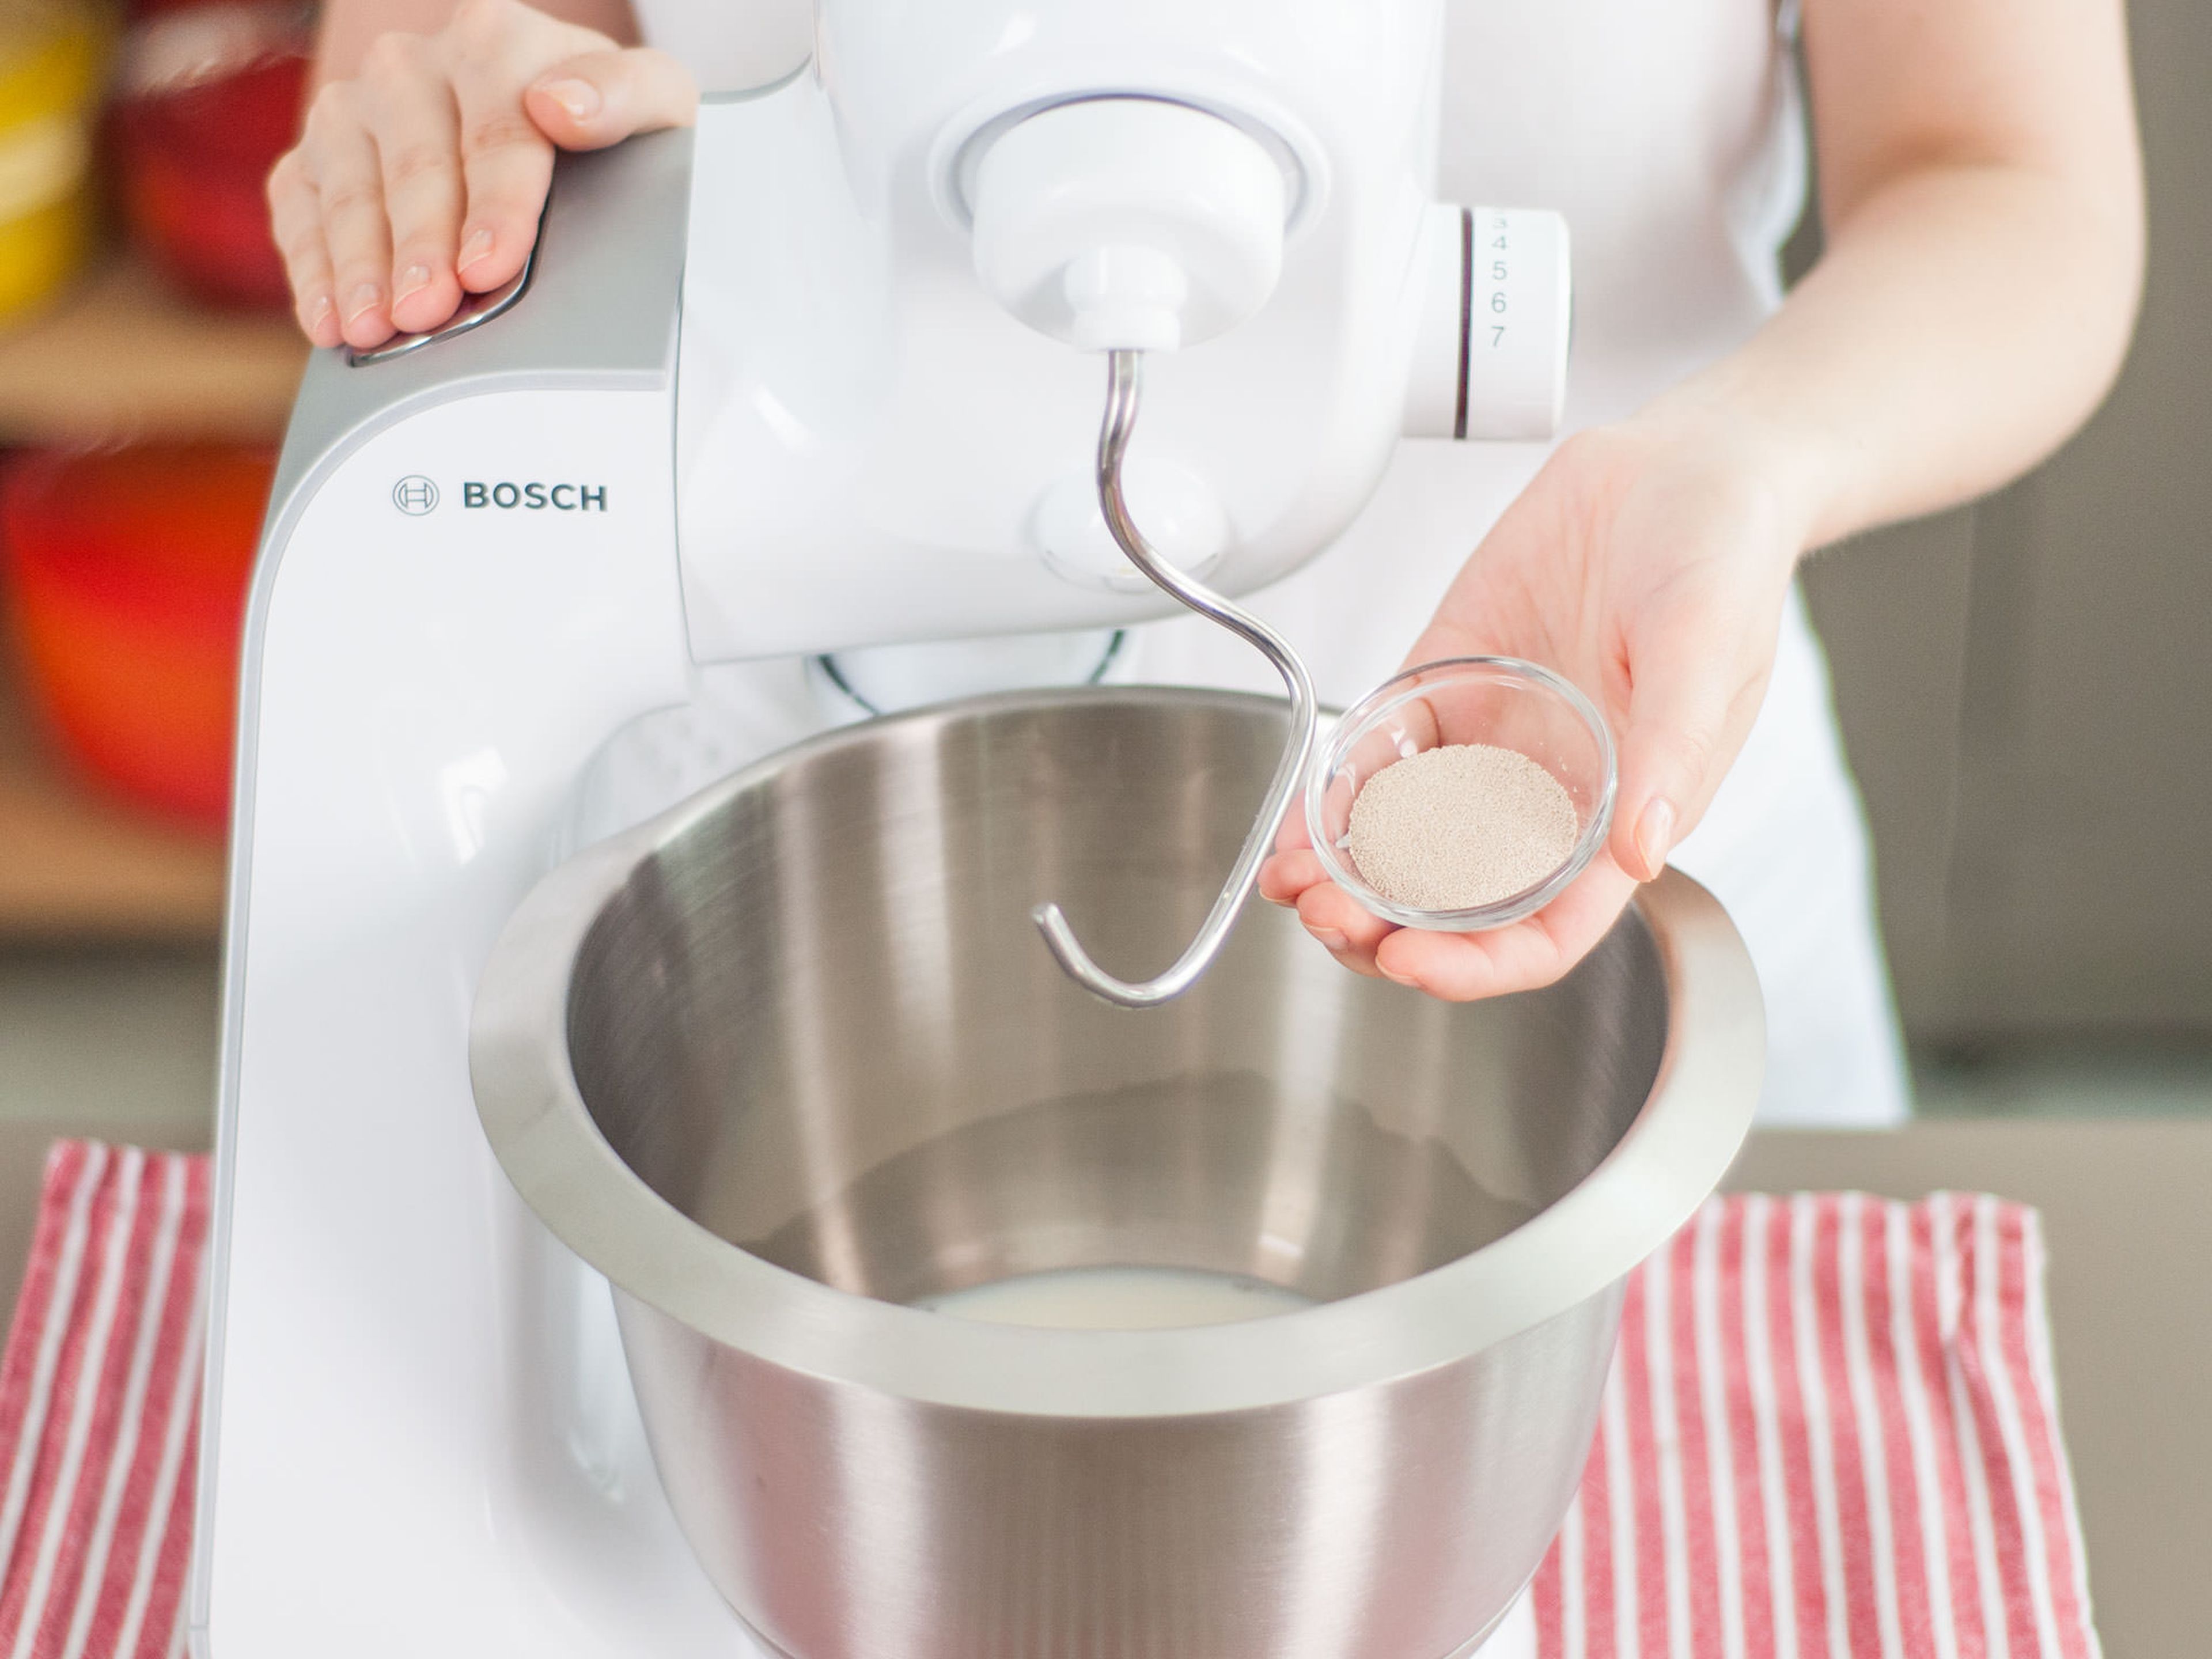 Combine yeast and milk in bowl of stand mixer, then cover and set aside until it turns foamy, approx. 10 min.